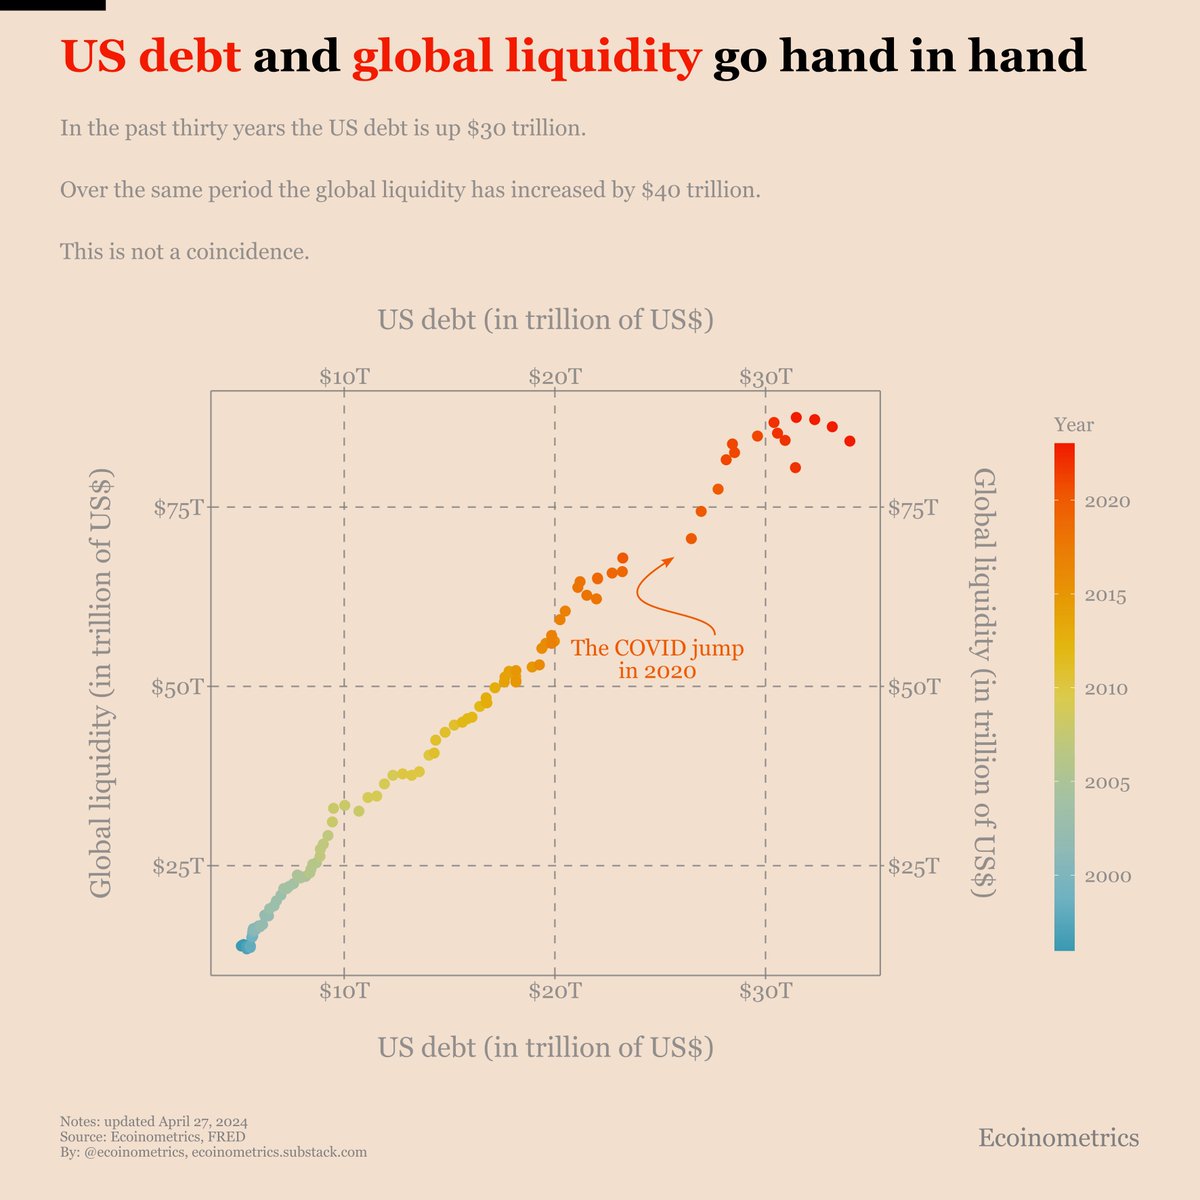 In the past thirty years the US debt increased by roughly $30 trillion. Over the same period the global liquidity has increased by $40 trillion. This is not a coincidence.